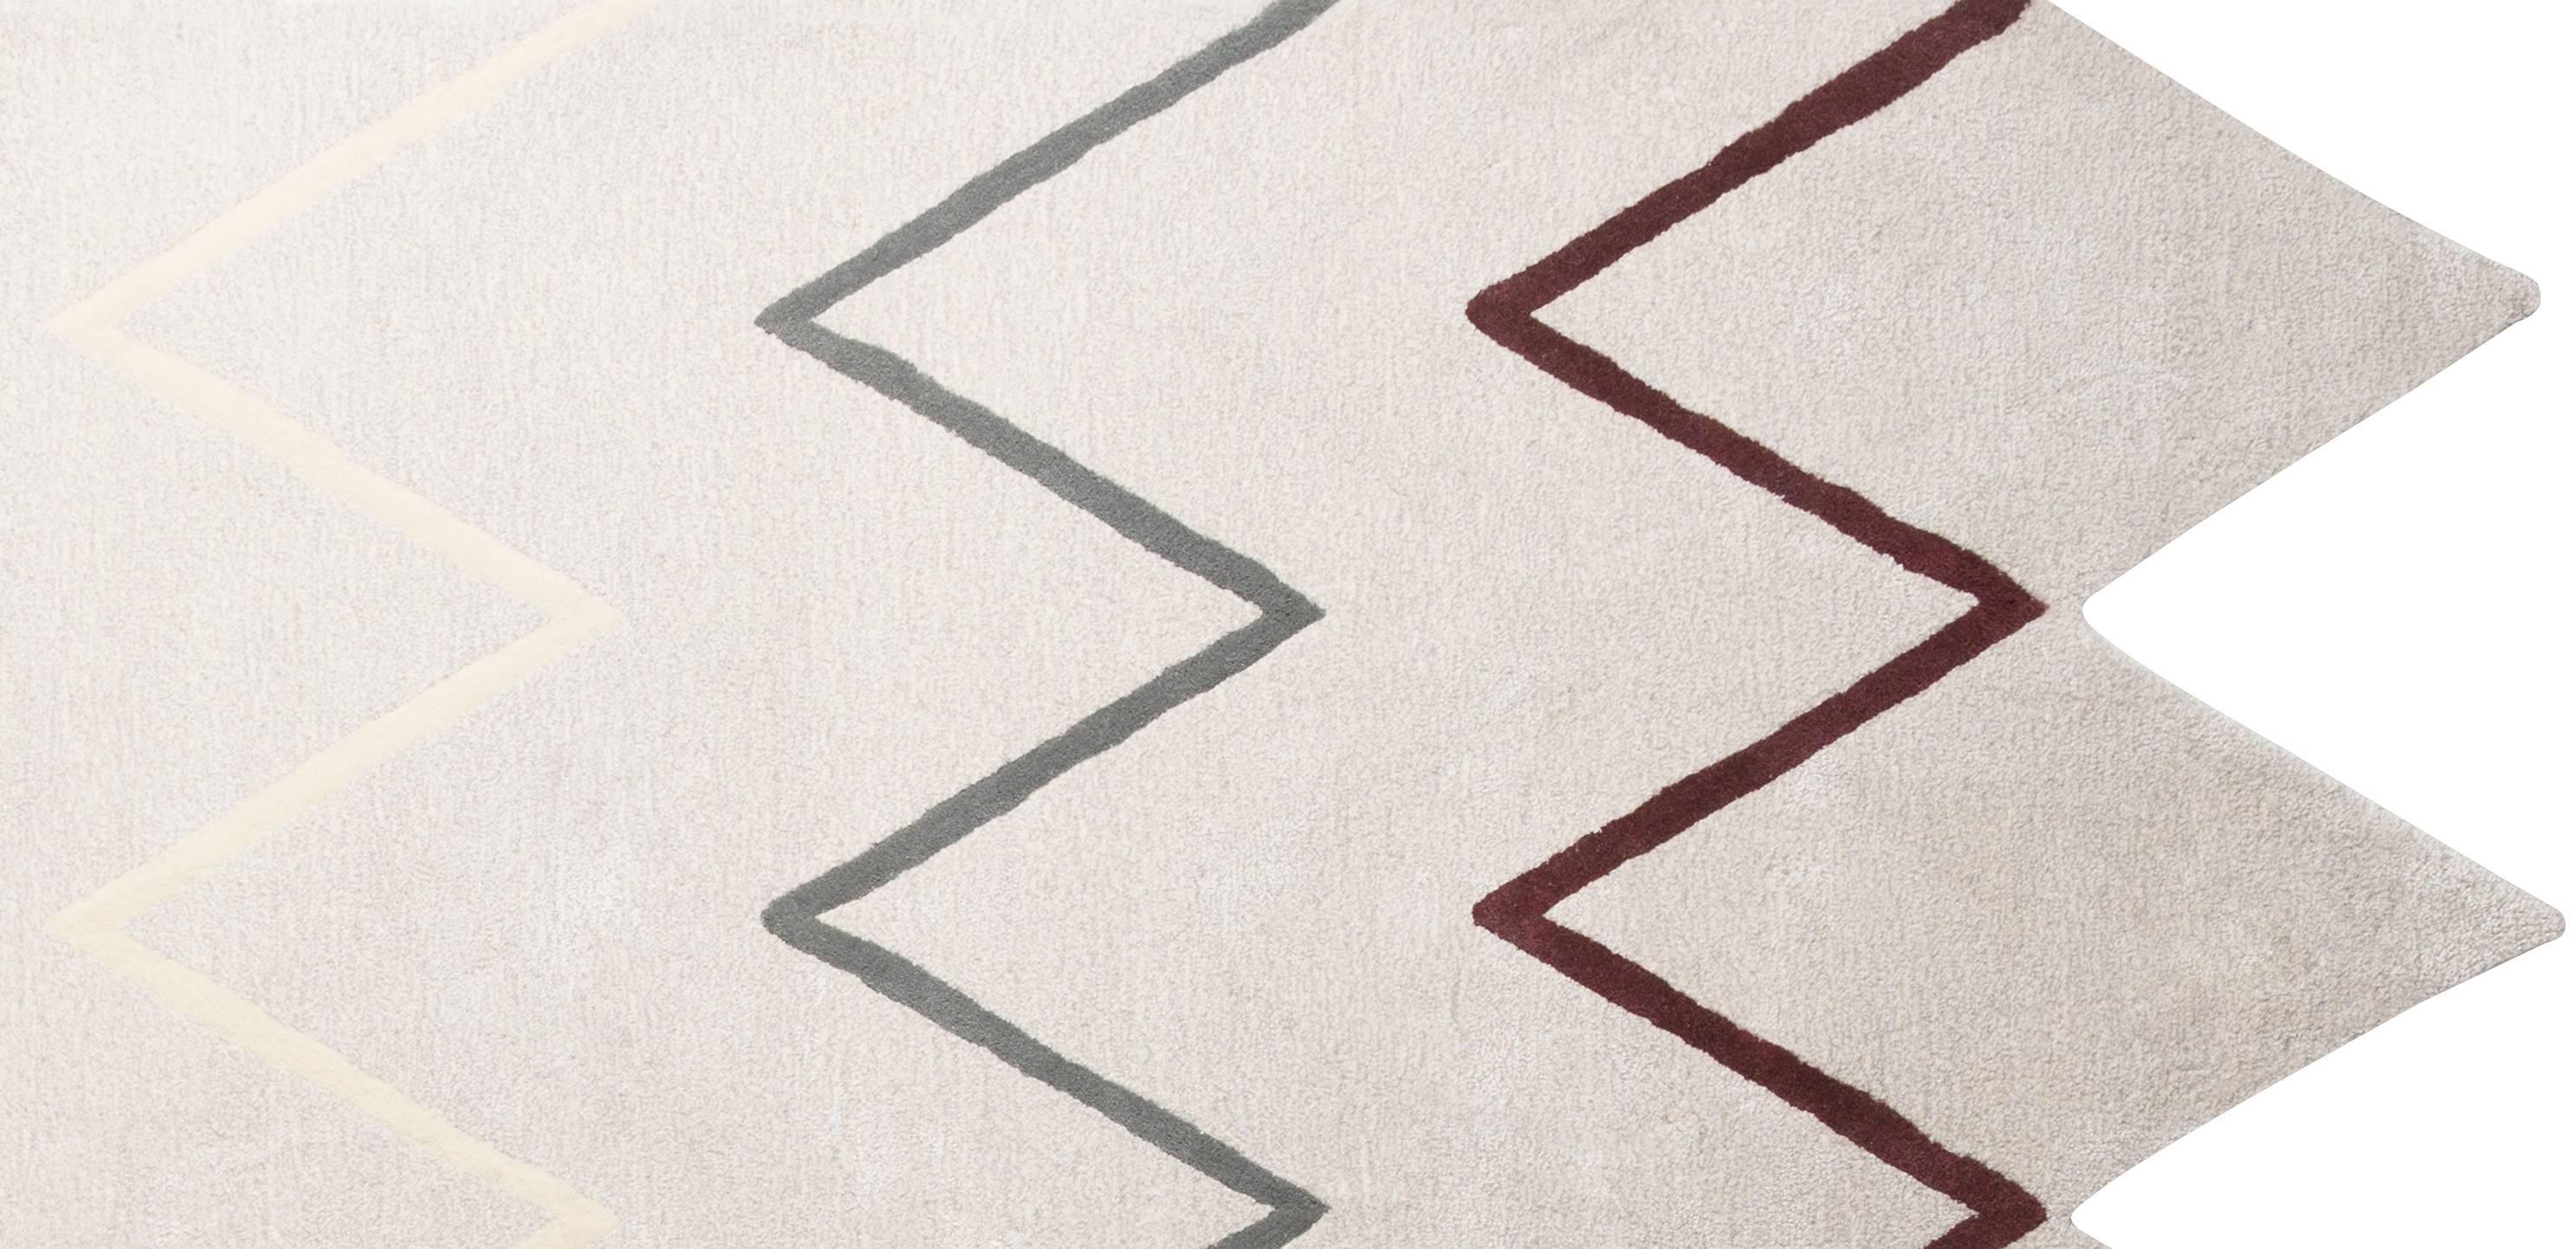 The Otto rug features a fun zig zag edge and matching print, in a soft, neutral color palette. Not another neutral to help ground a room. Rugs that make the room. Hand tufted rug made of a wool/viscose blend. Designed by Pieces.

Custom options,